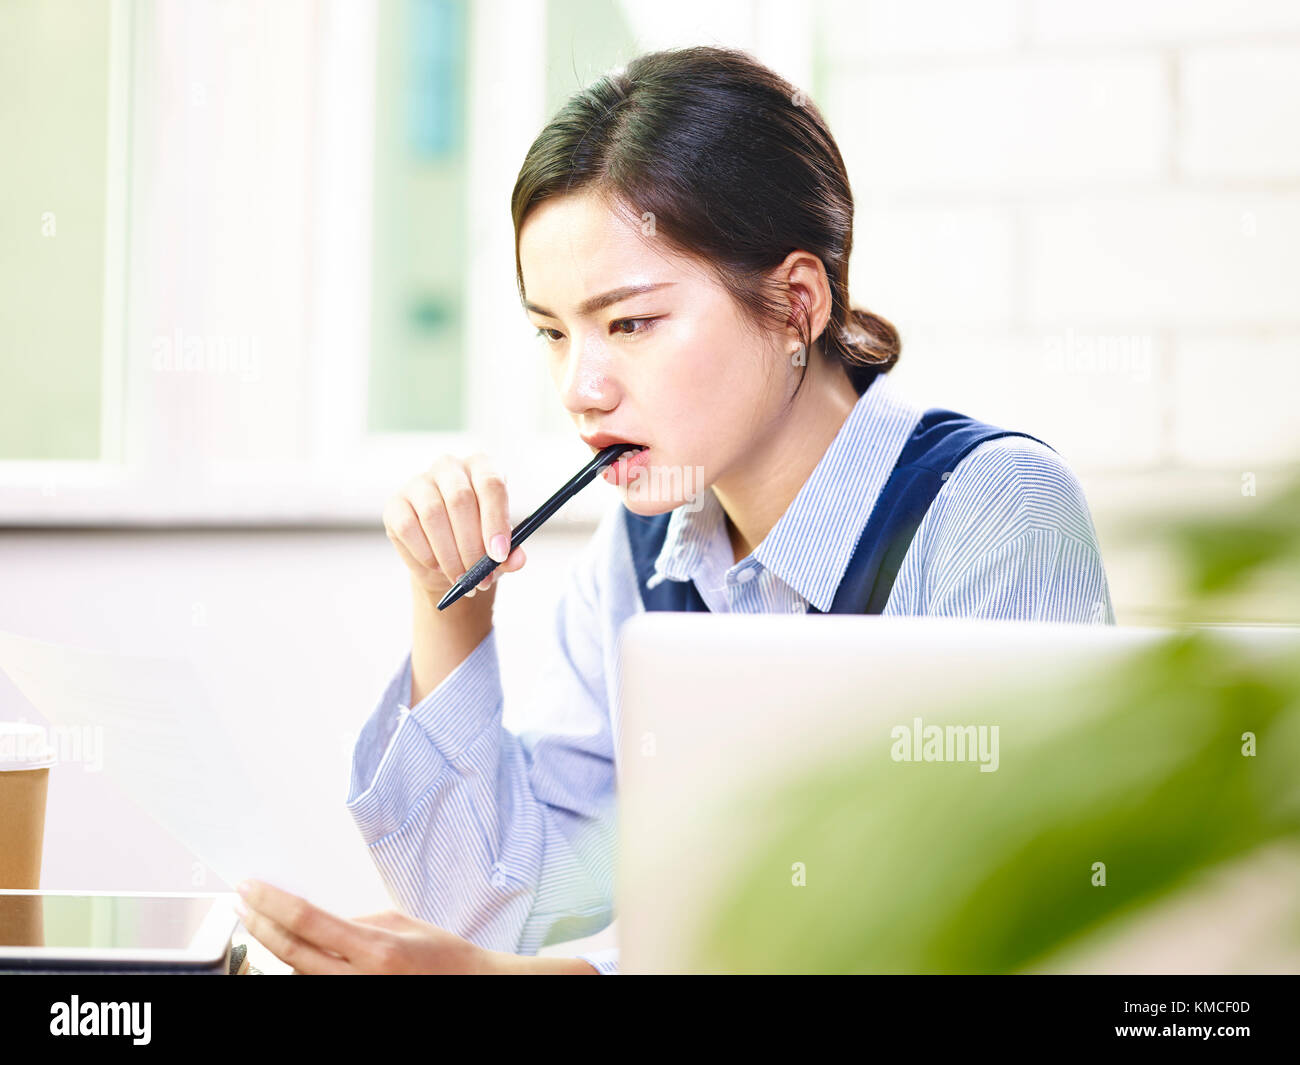 young asian woman corporate executive analyzing a report in modern office. Stock Photo